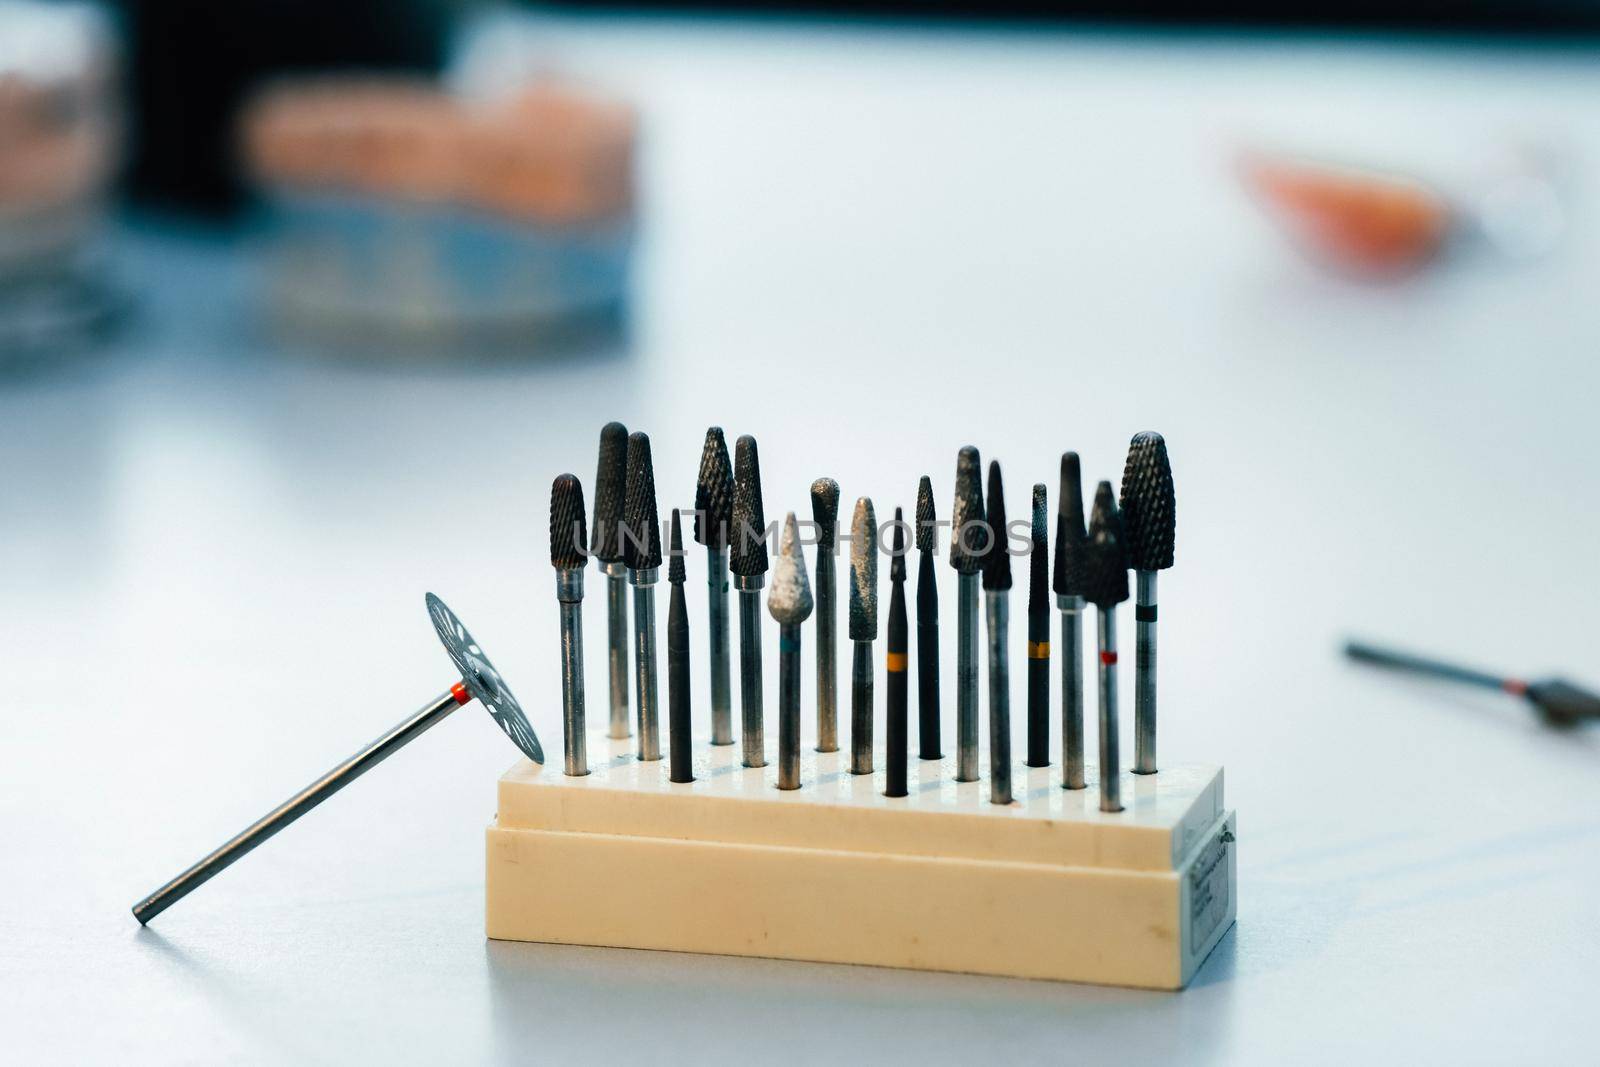 Grinding tools and drills for dental technicians.